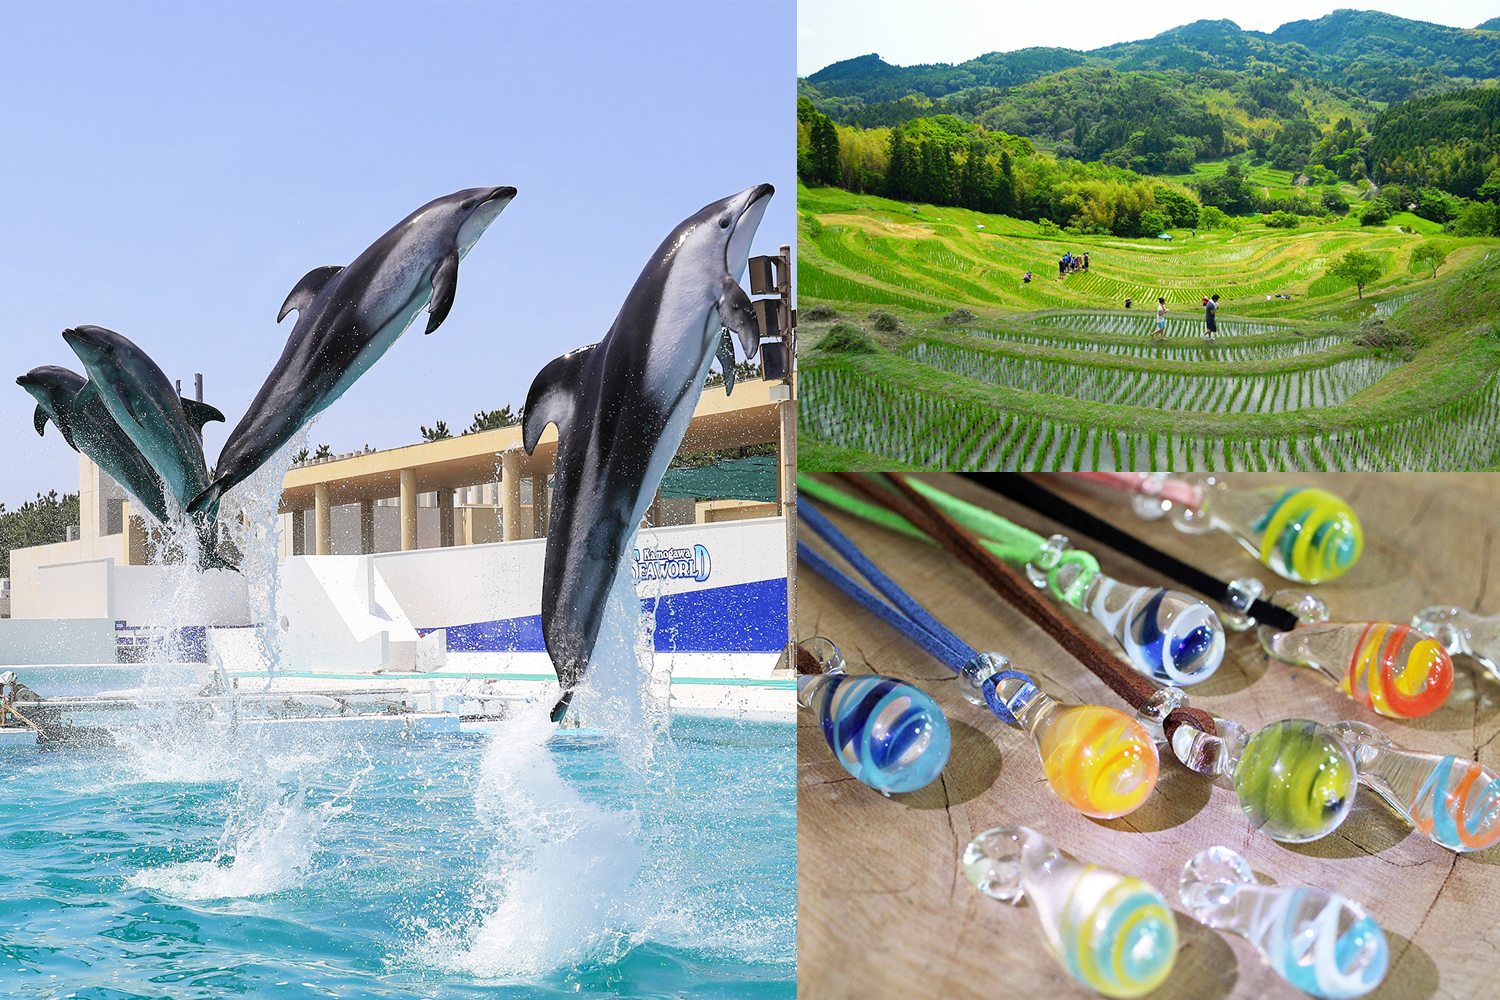 Visit one of the closest resorts from Tokyo!